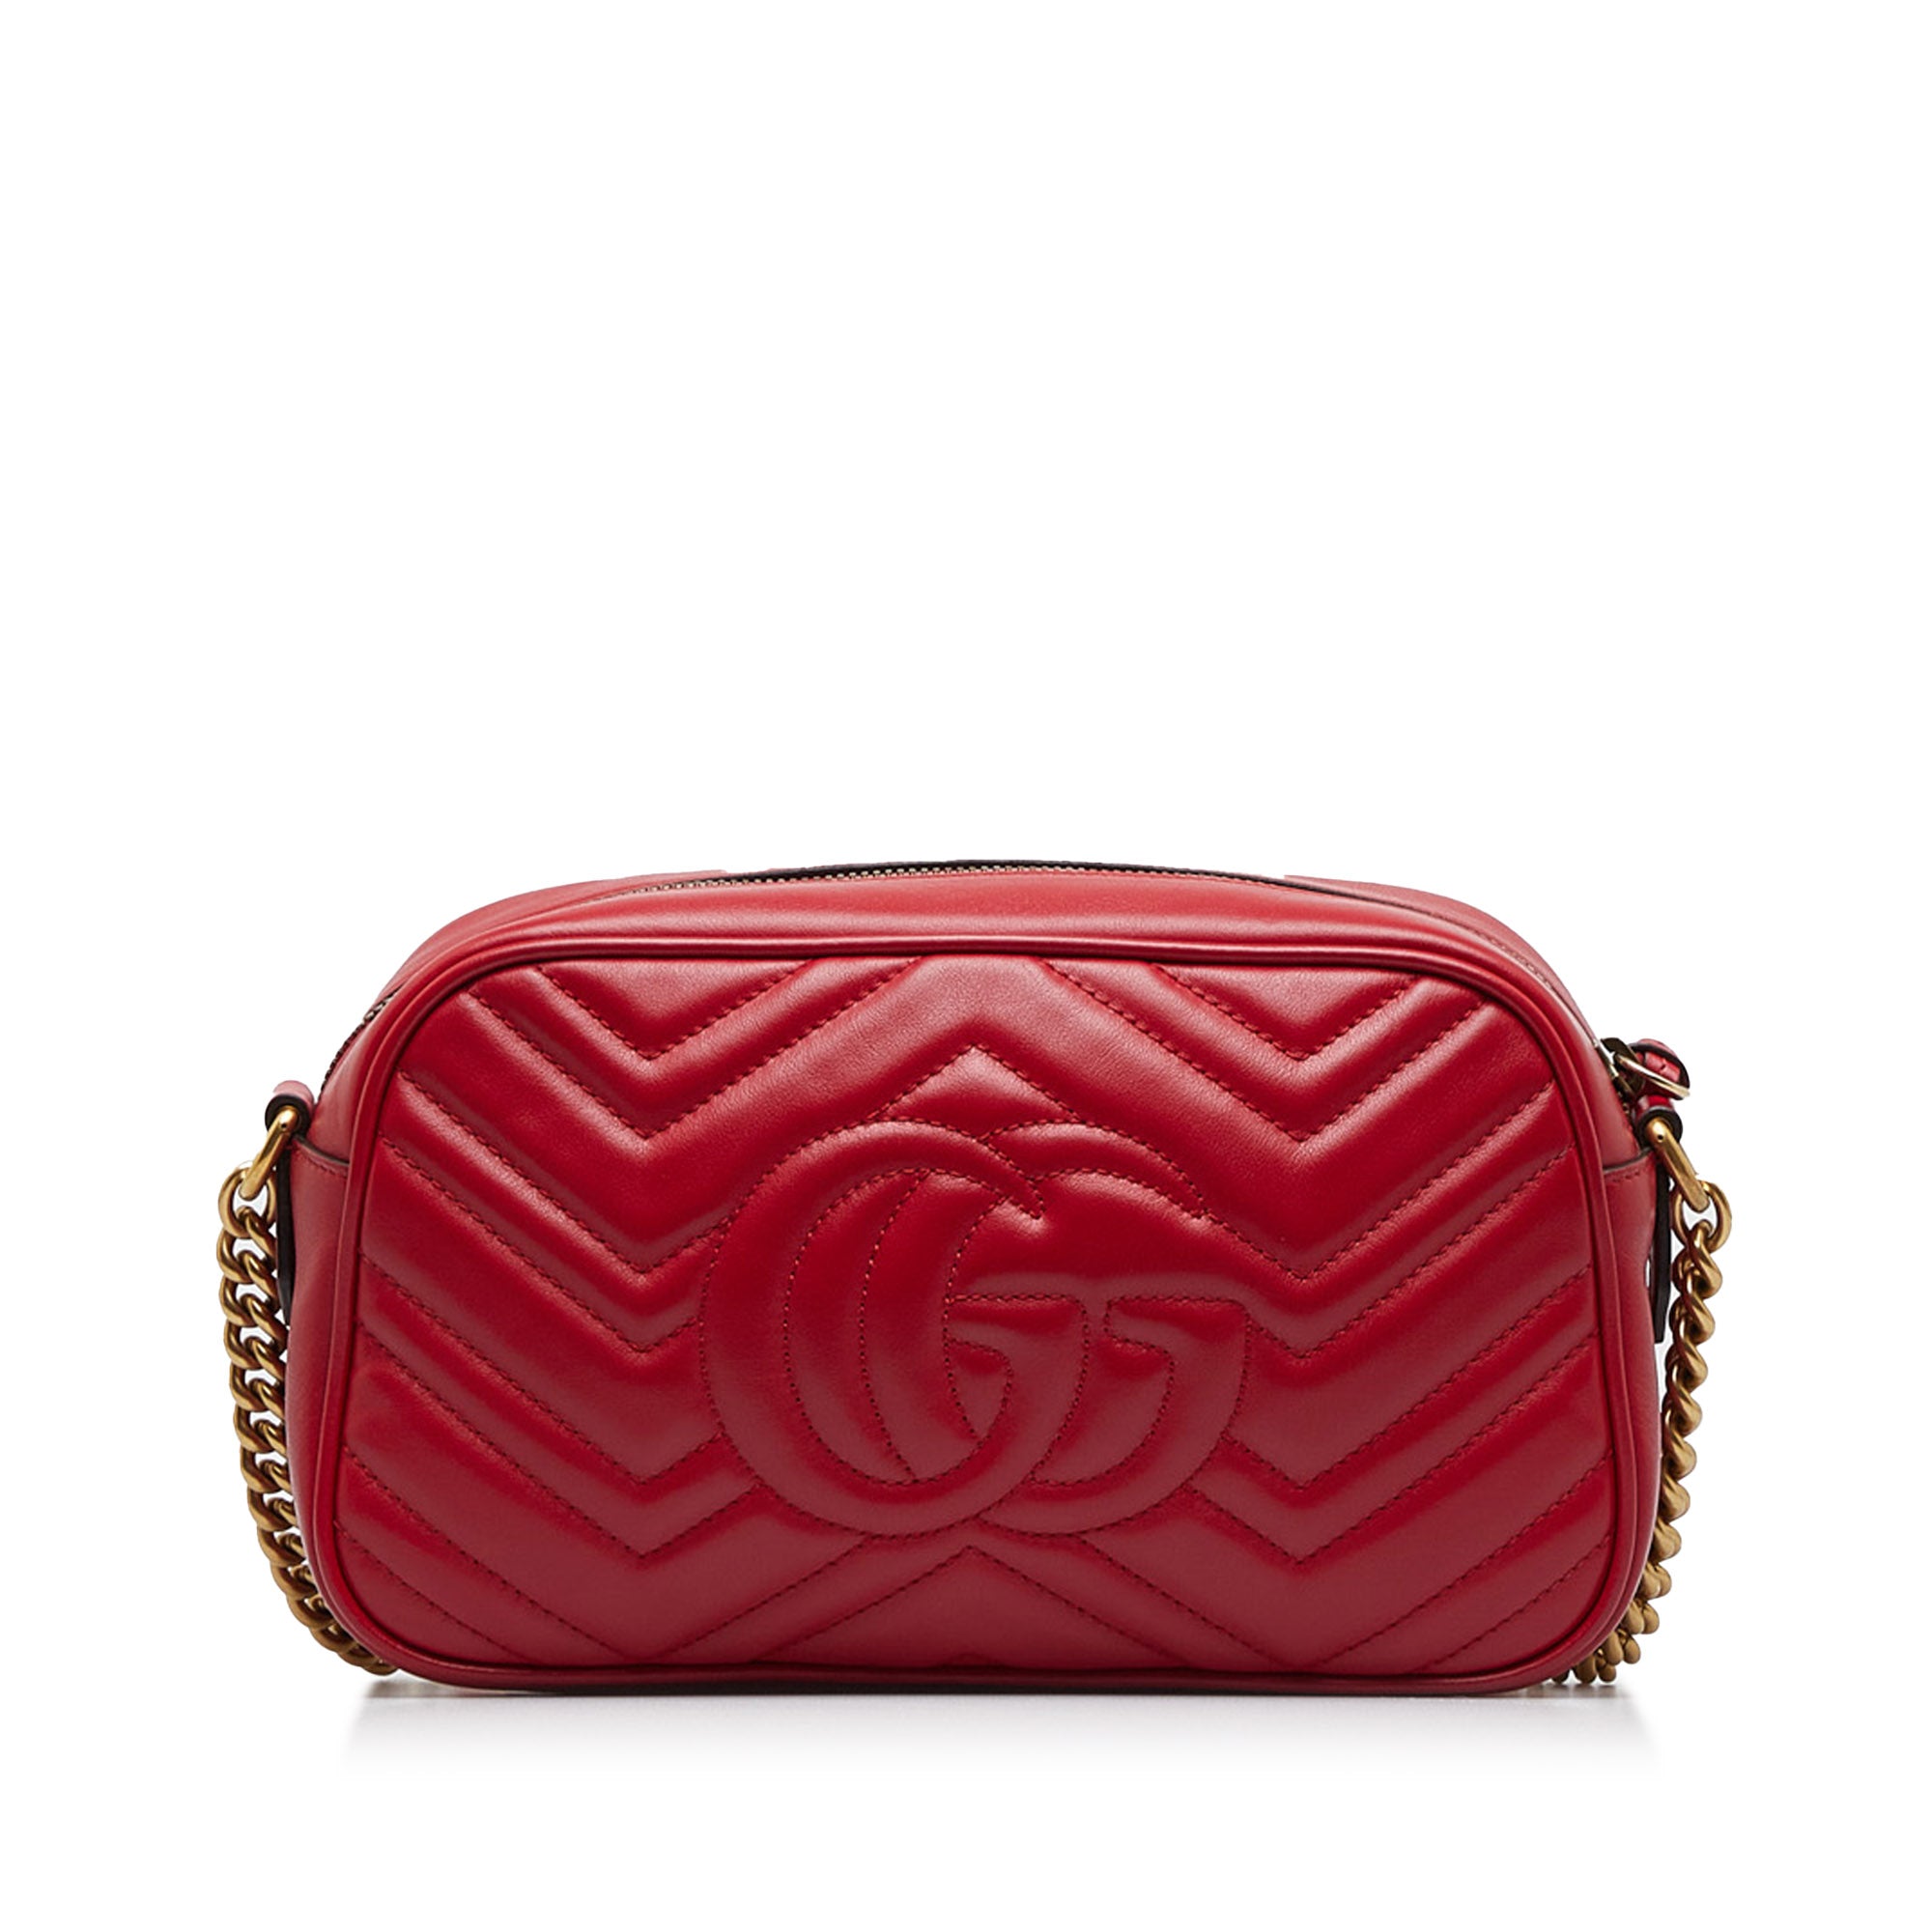 Gucci 'GG Marmont Small' Shoulder Bag in Red